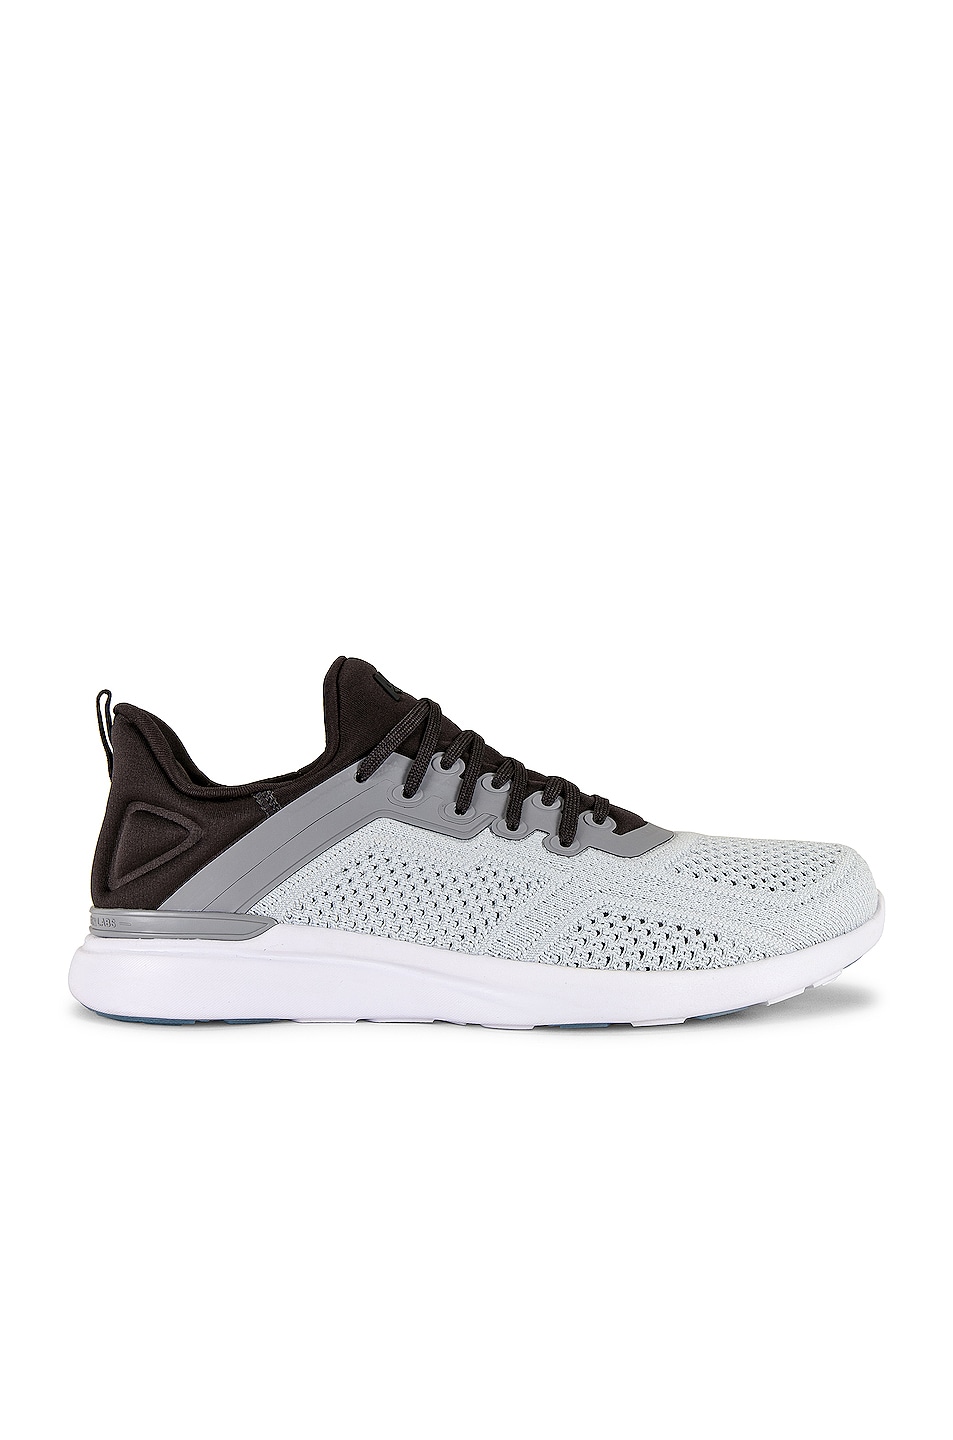 Image 1 of APL: Athletic Propulsion Labs Techloom Tracer Sneaker in Steel Grey, Cement & Anthracite